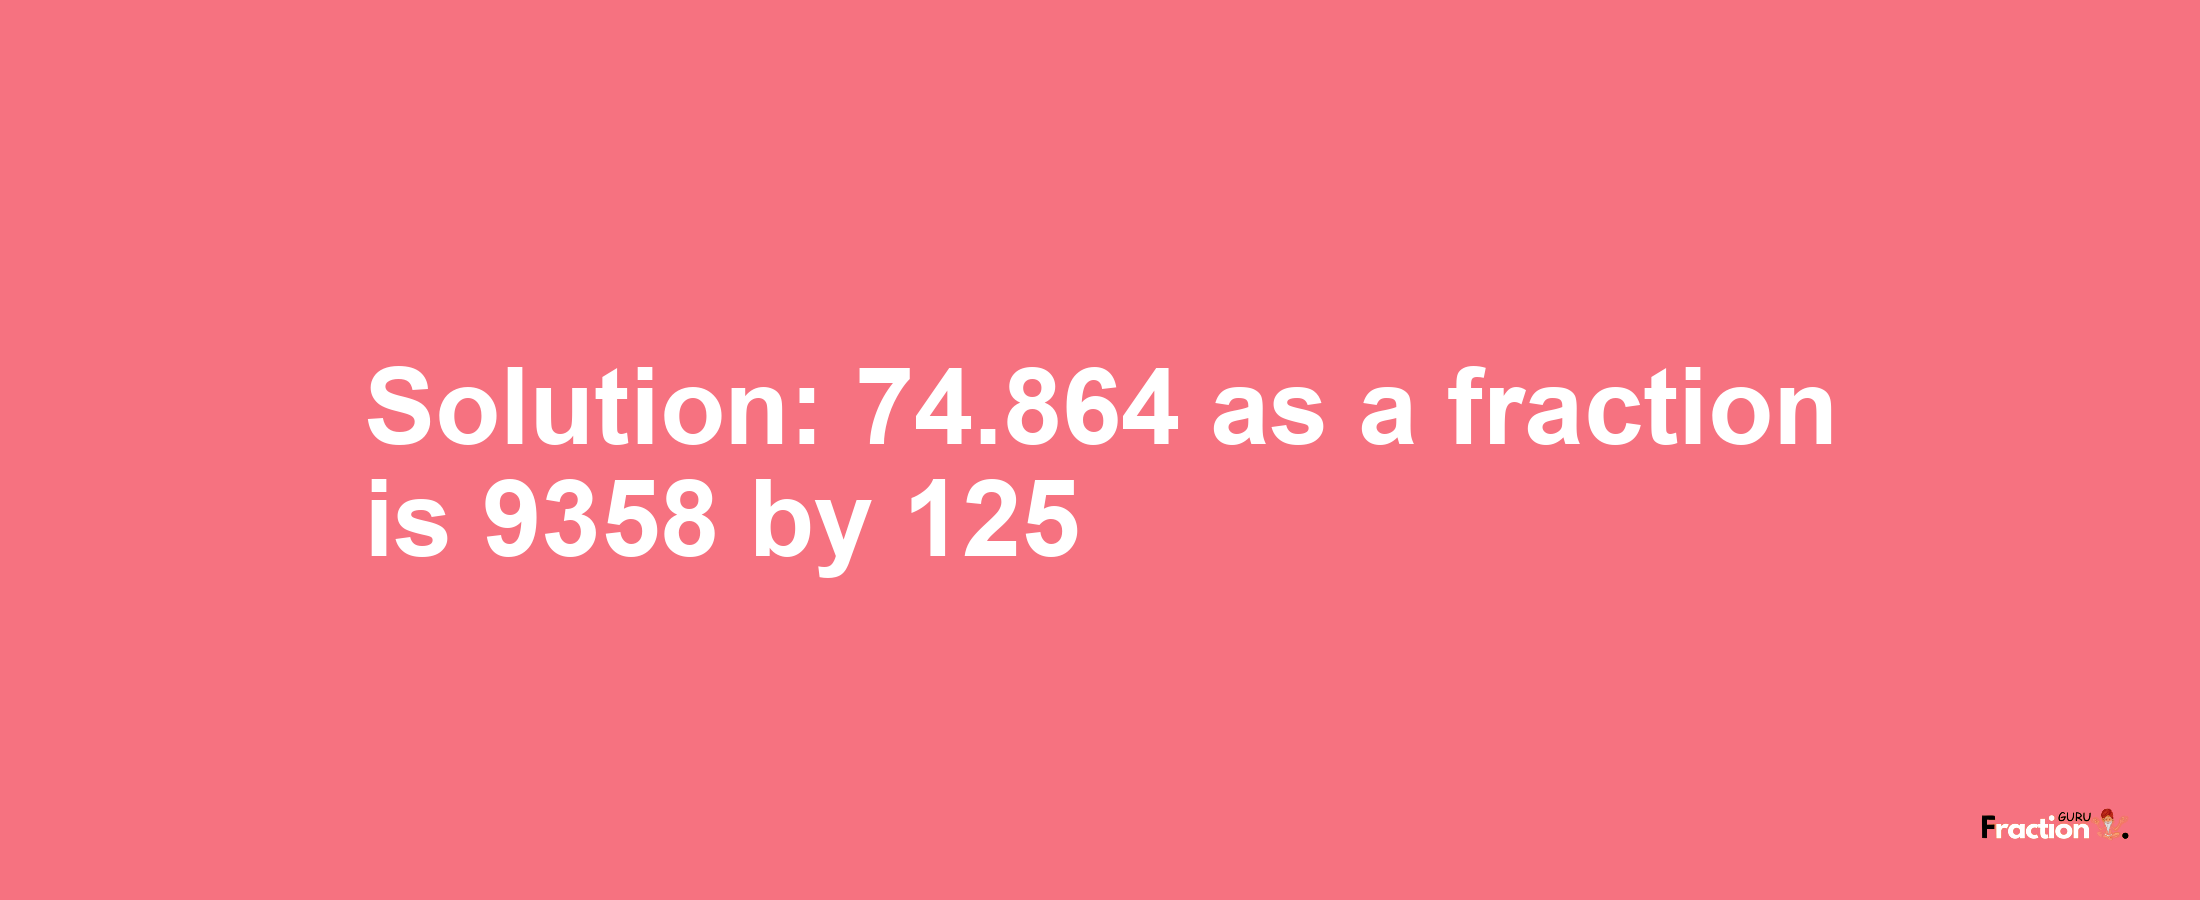 Solution:74.864 as a fraction is 9358/125